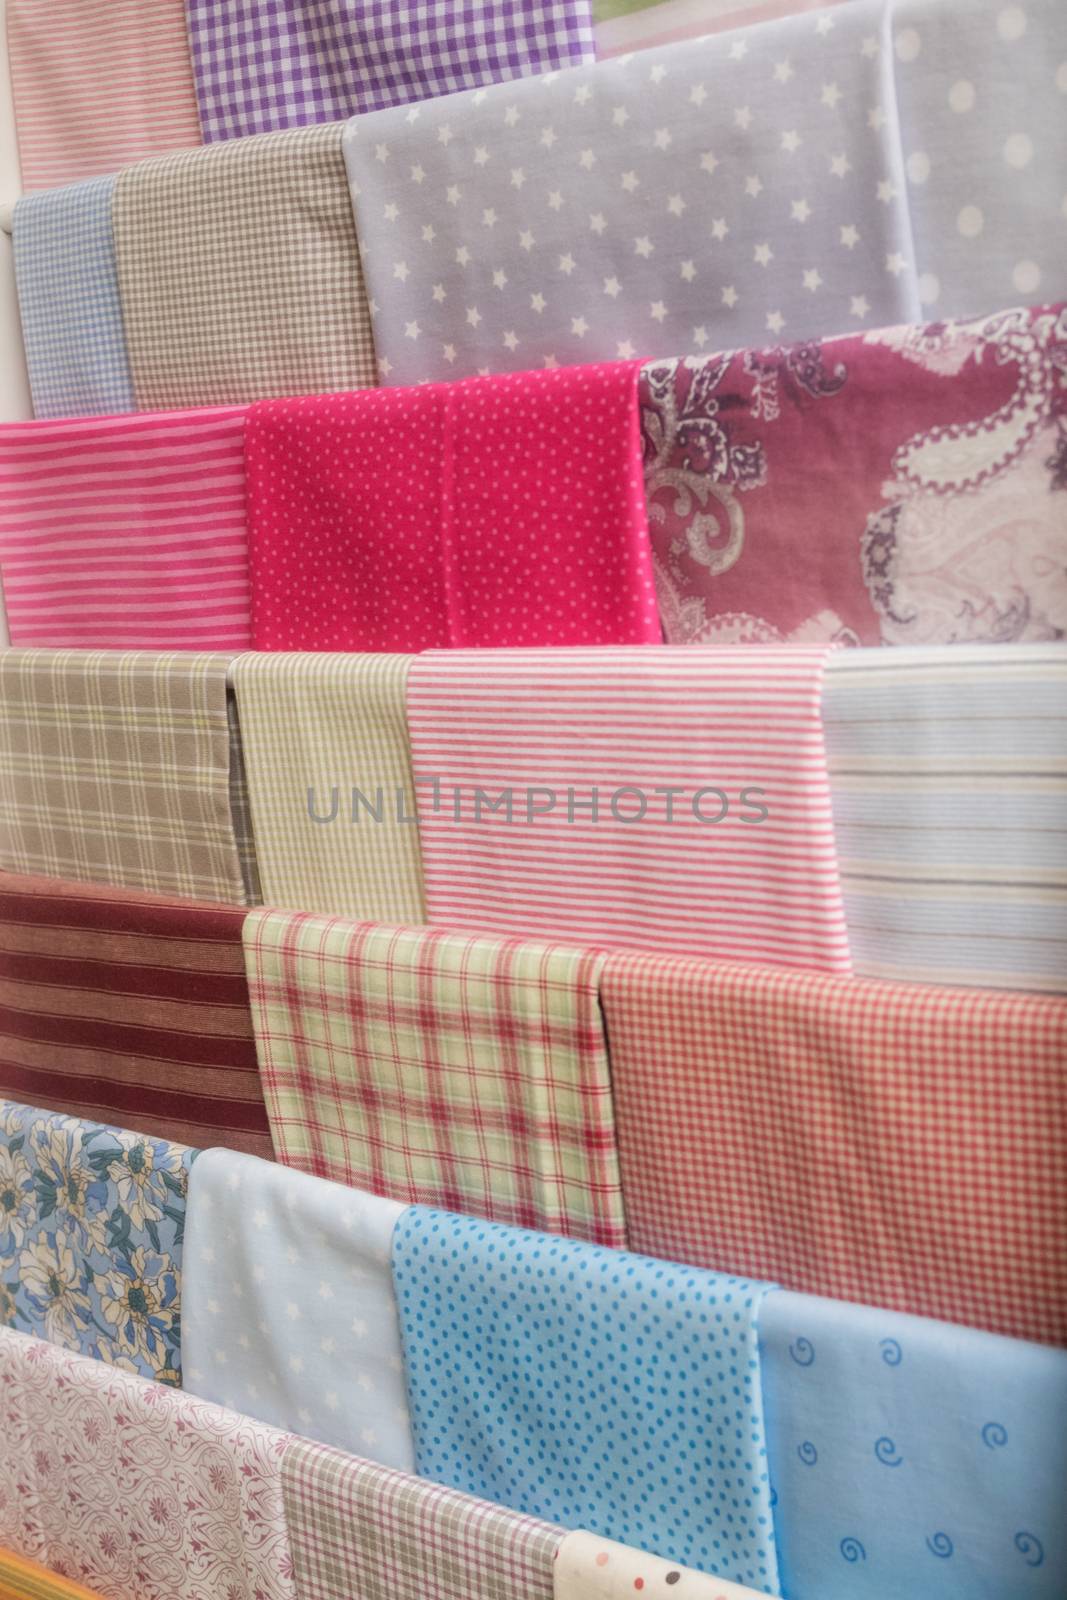 Many colorful fabrics hang on the wall by sandra_fotodesign